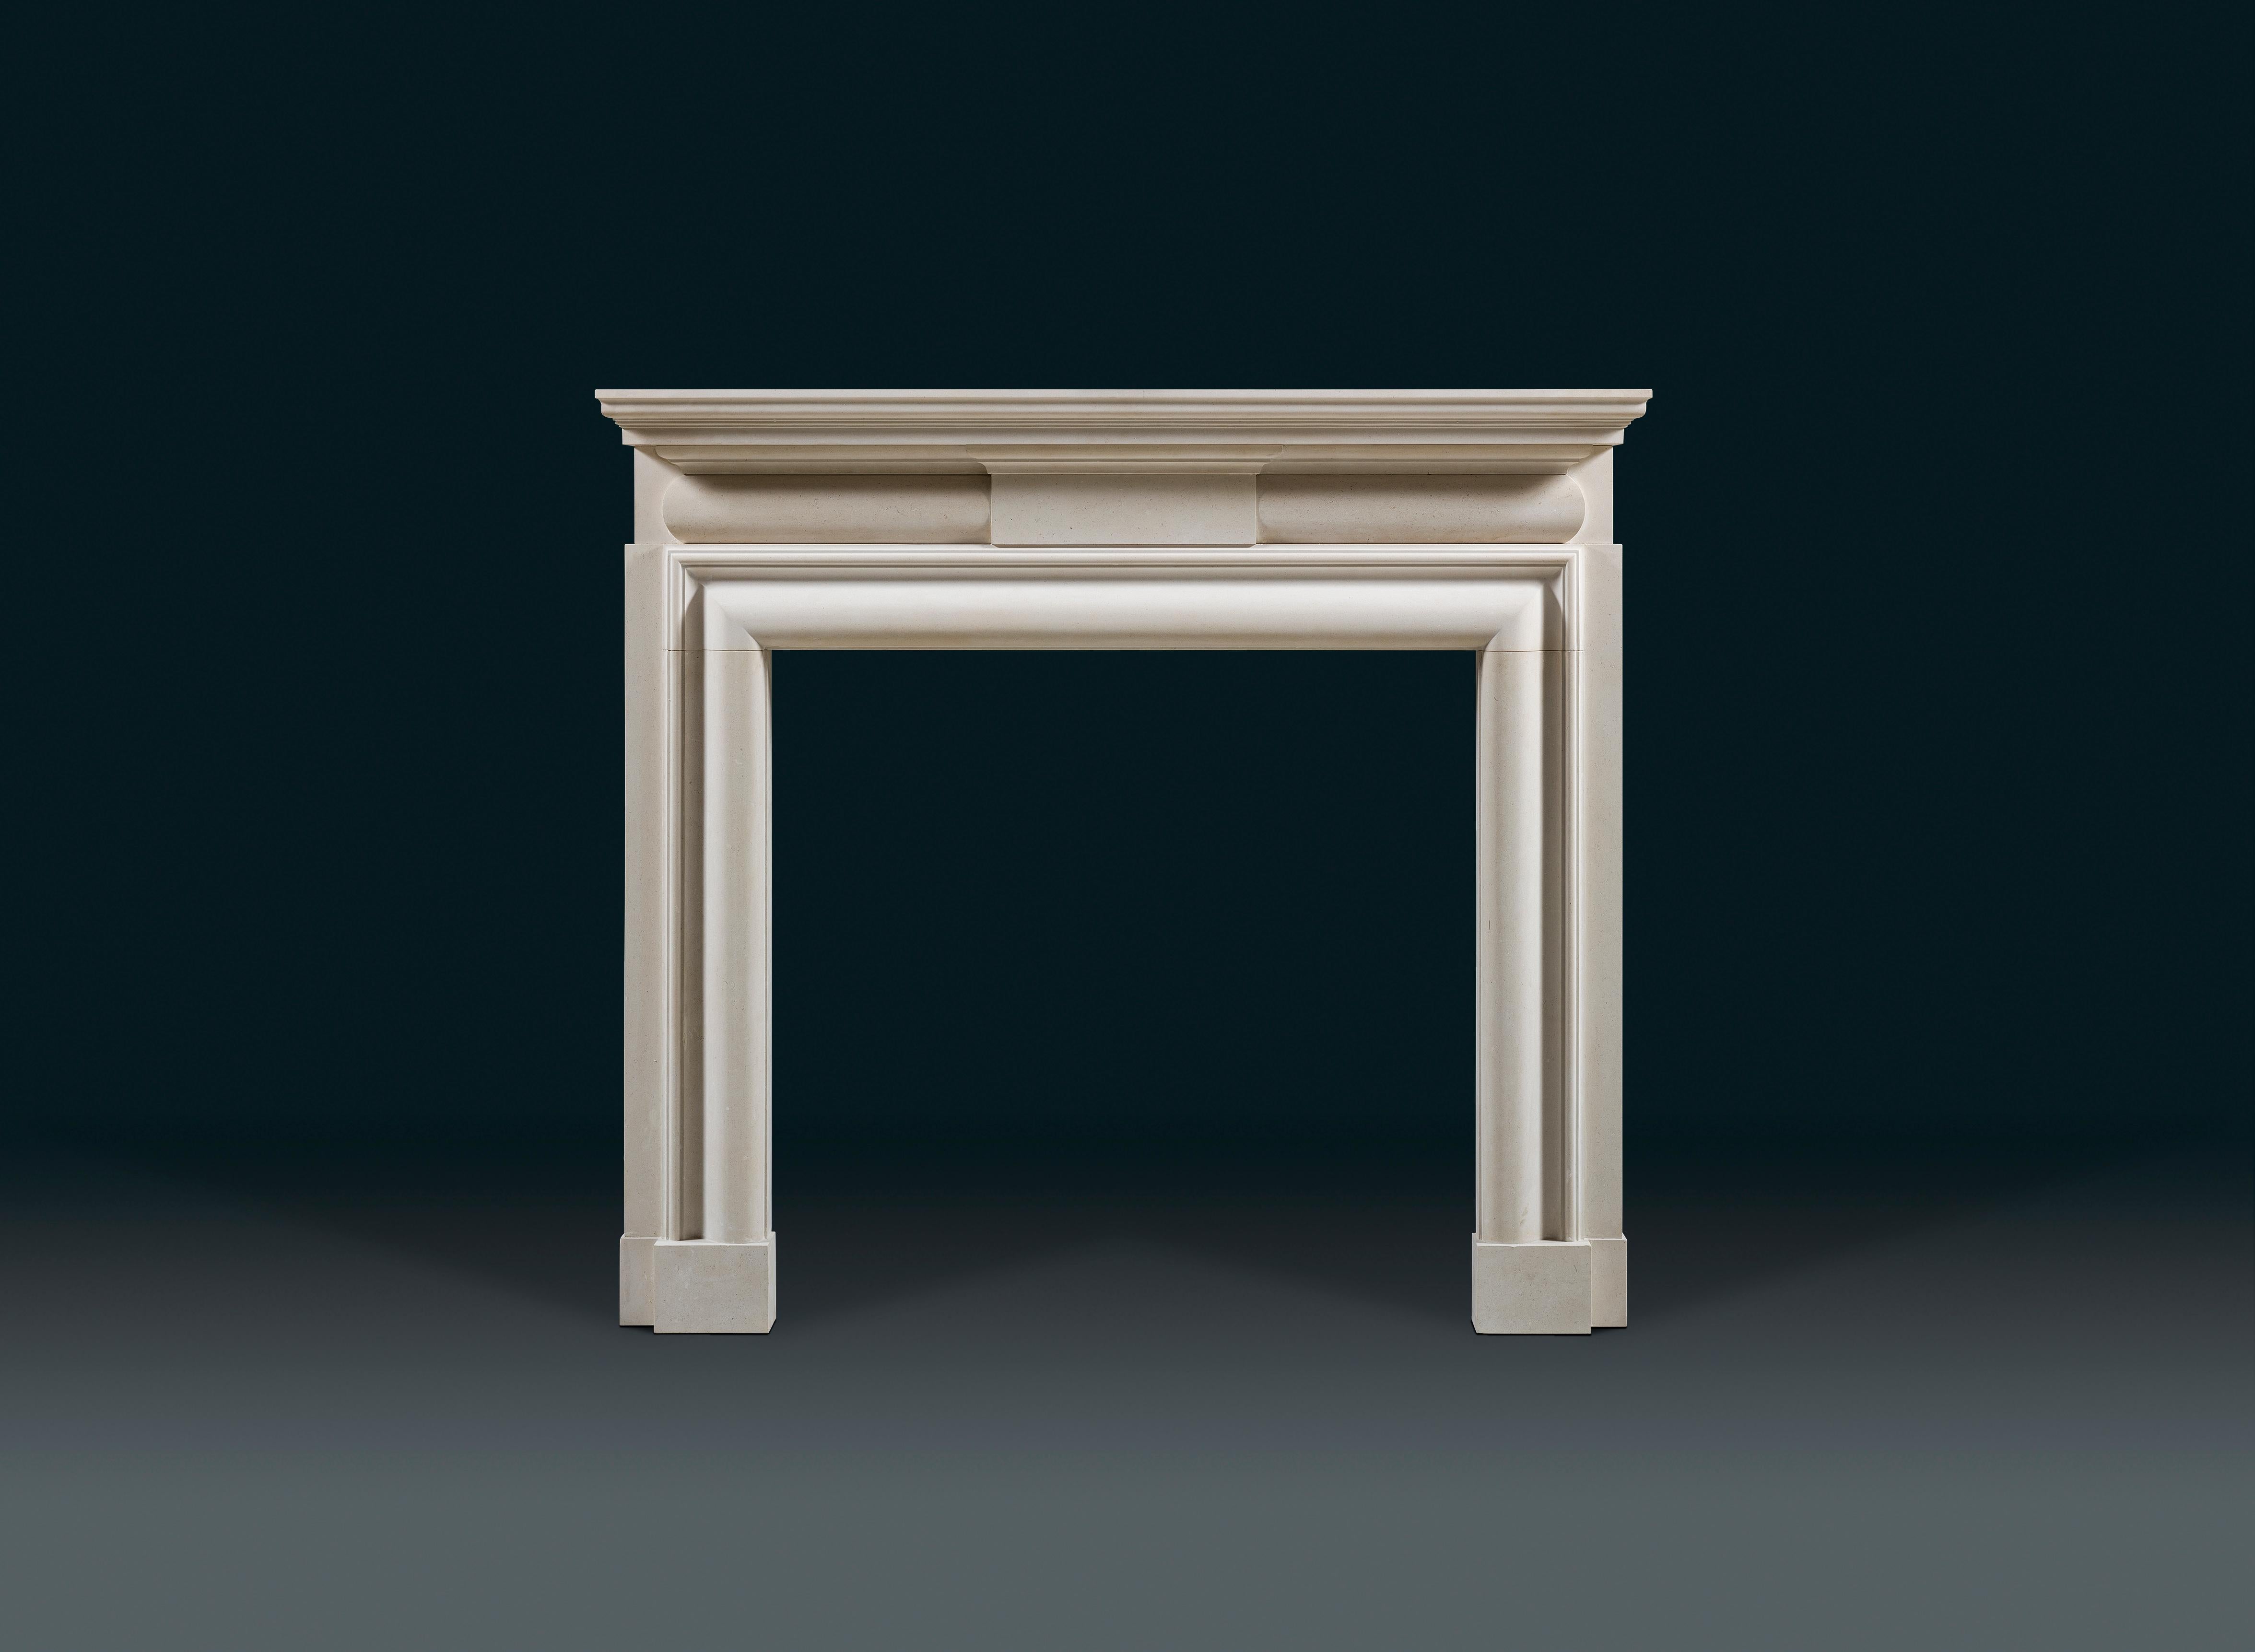 After an original design by Edwin Lutyens, combining his unique neo Georgian classicism with his own eclectic forward looking, uncluttered style. The design reliant on simple pure lines and contours, using antique bolection and pulminated mouldings